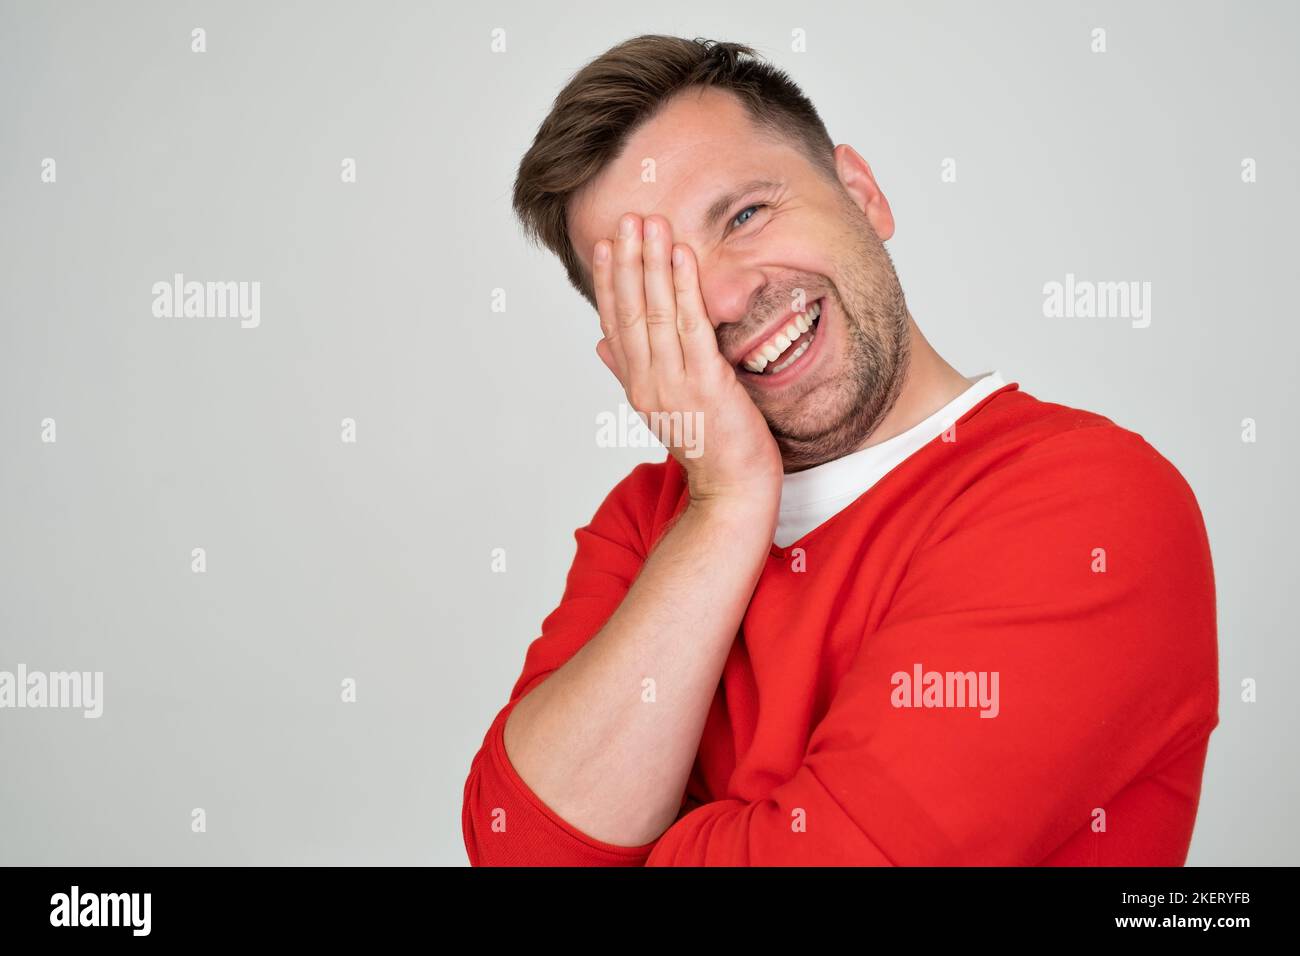 Mature man covering his face and smiling being pleased with compliment Stock Photo